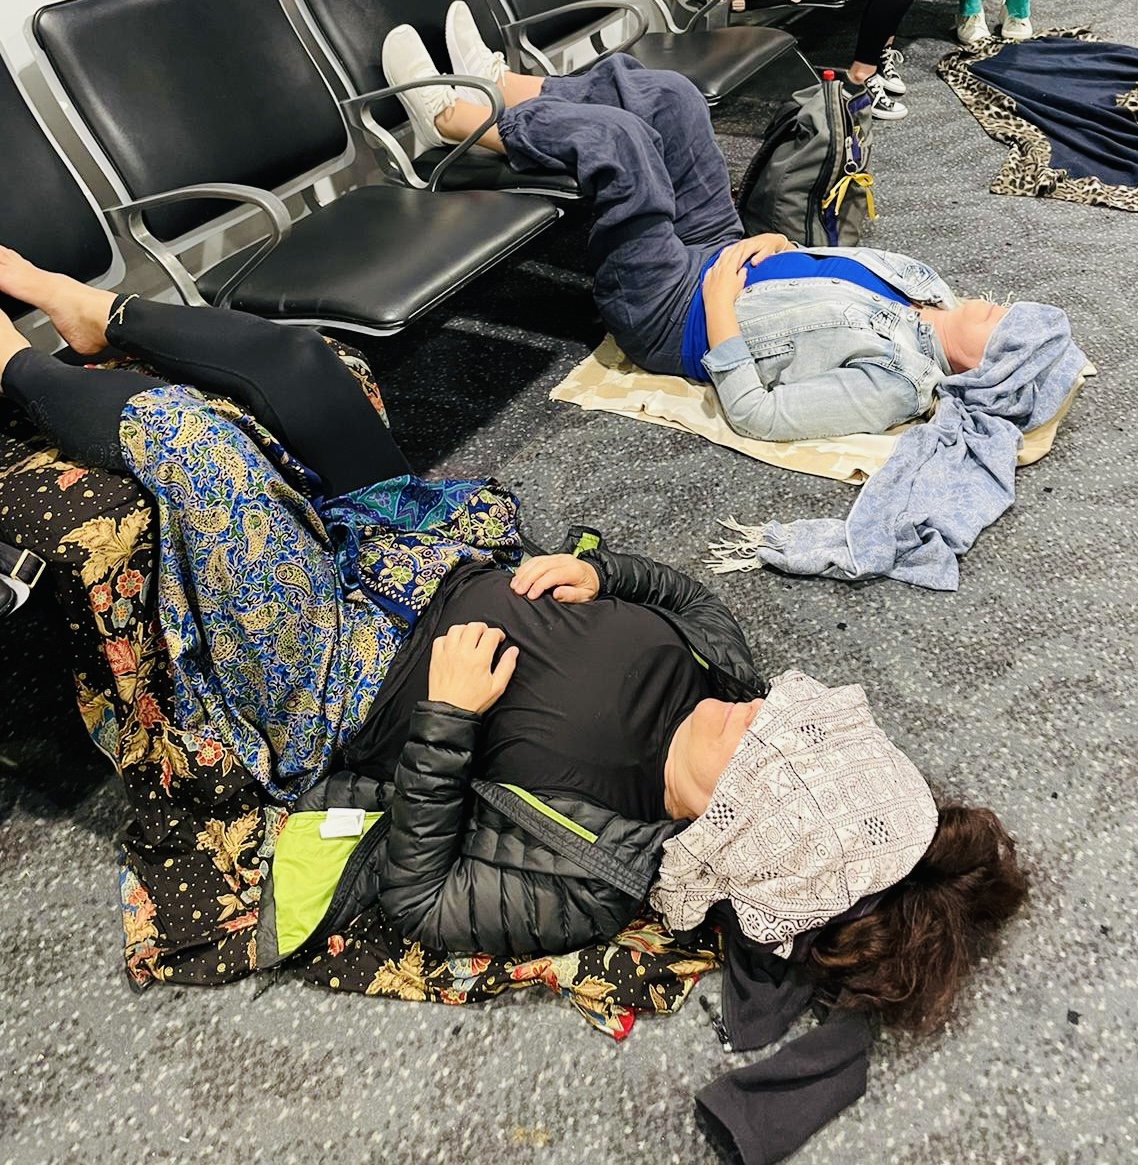 Two women doing yoga in the airport 